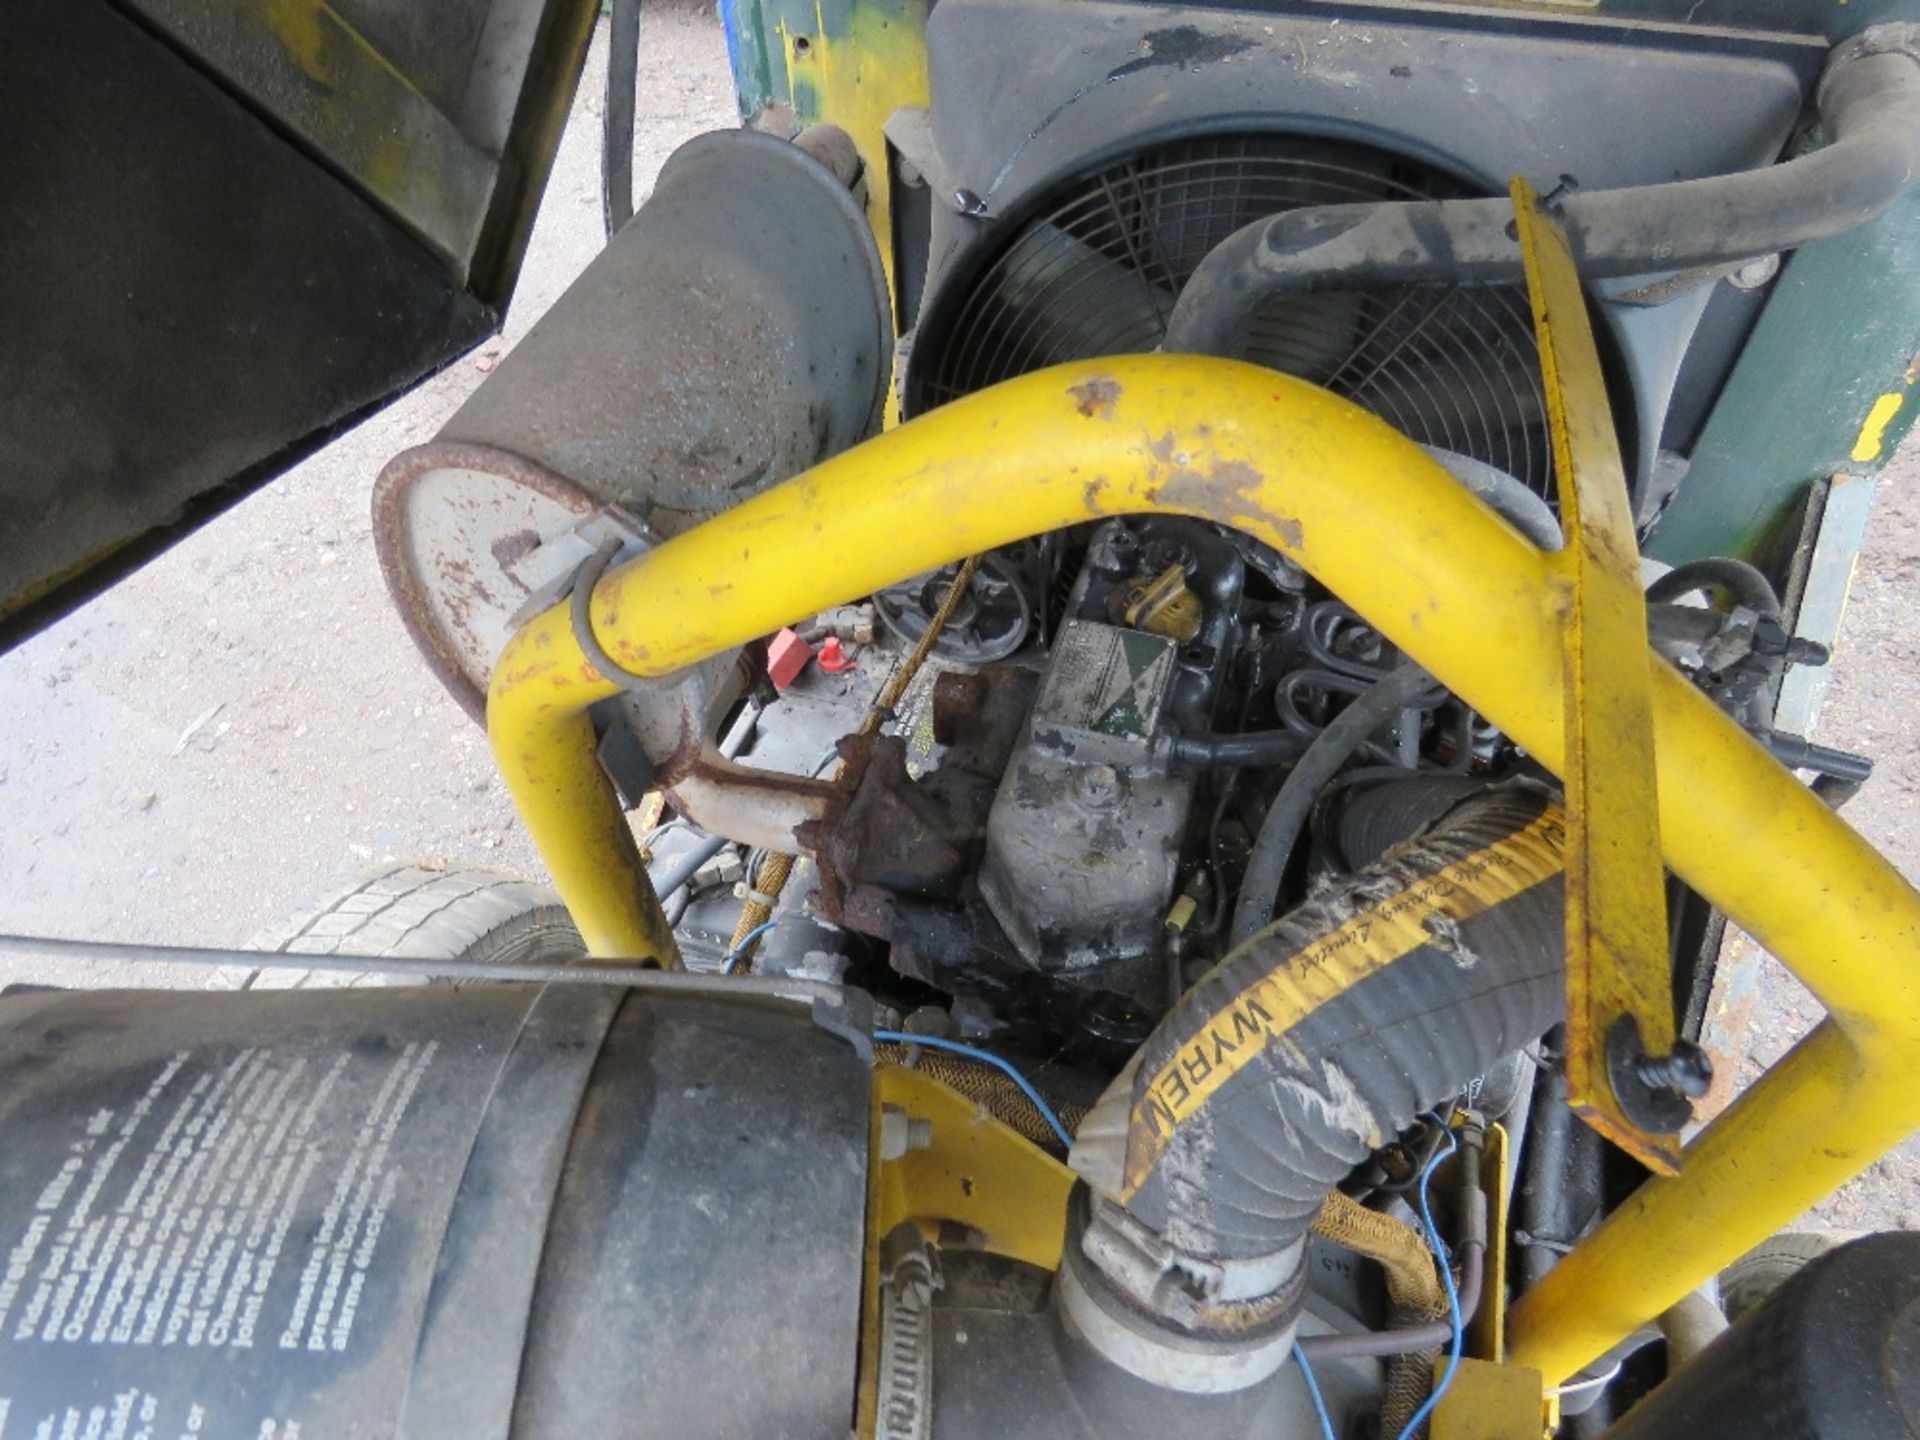 ATLAS COPCO COMPRESSOR WITH YANMAR ENGINE. VENDOR'S COMMENTS: RUNS AND MAKES AIR BUT REQUIRES A FAN - Image 6 of 8